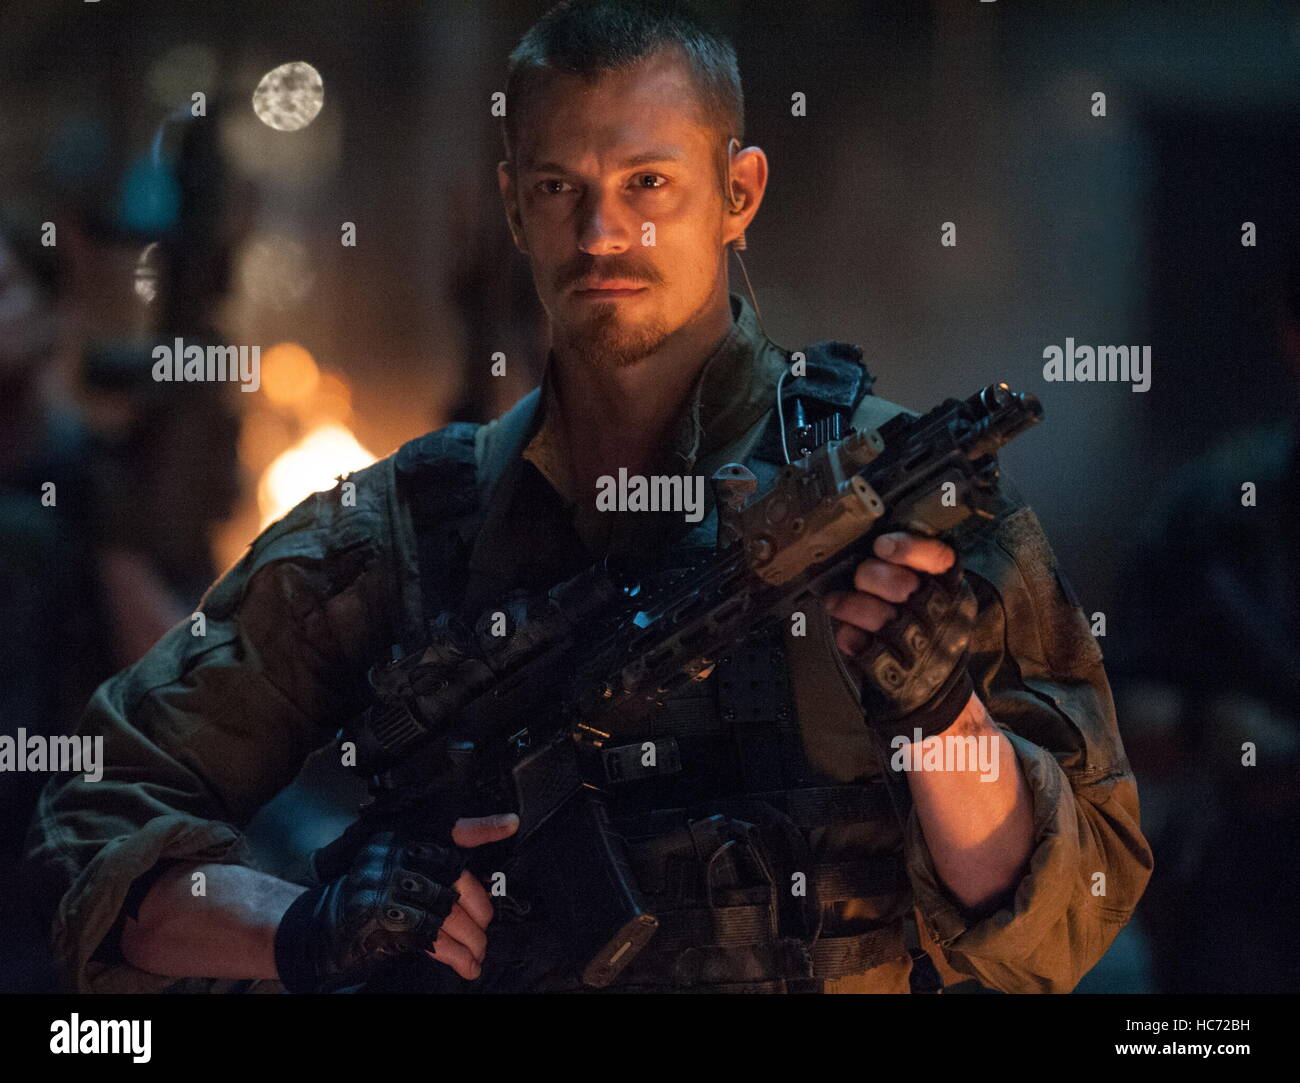 RELEASE DATE: August 5, 2016 TITLE: Suicide Squad STUDIO: Atlas Entertainment DIRECTOR: David Ayer PLOT: A secret government agency recruits imprisoned supervillains to execute dangerous black ops missions in exchange for clemency STARRING: Joel Kinnaman as Rick Flagg (Credit Image: c Atlas Entertainment/Entertainment Pictures/) Stock Photo